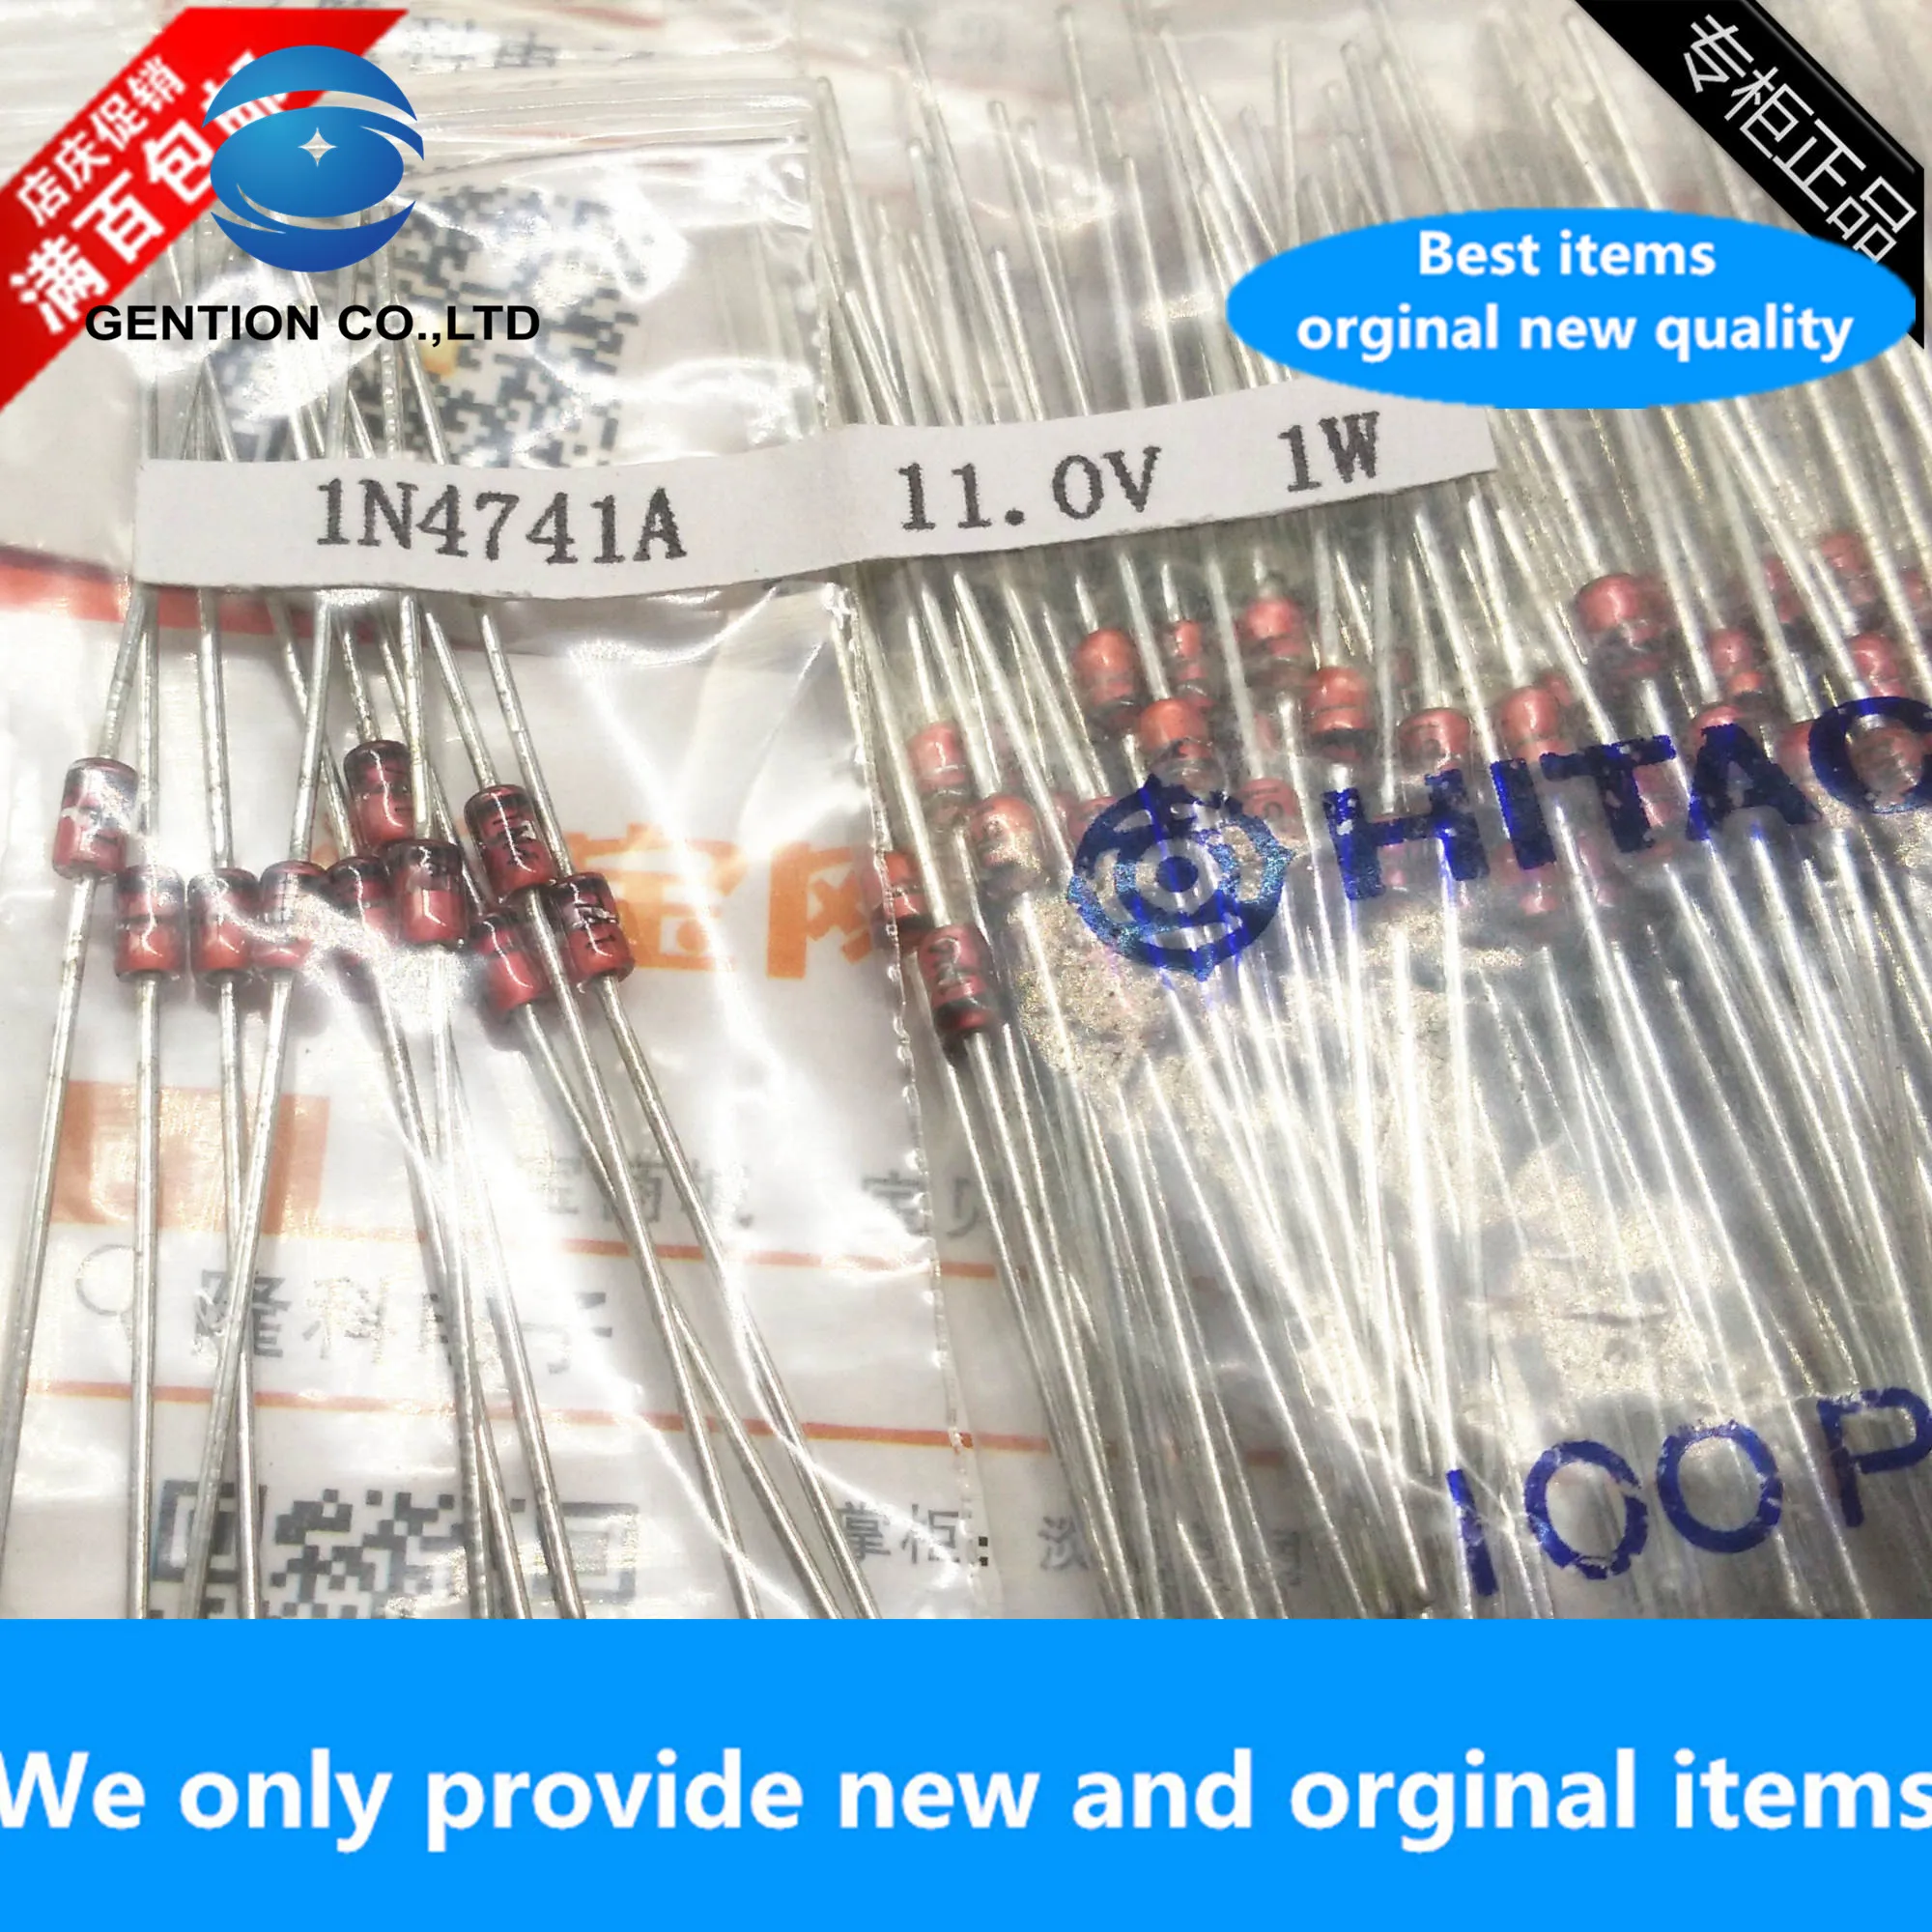 

30PCS 100% New original 1N4741A imported voltage stabilizer diode 11V 1W Watt Japan 4741A IN4741A straight plug DO-41